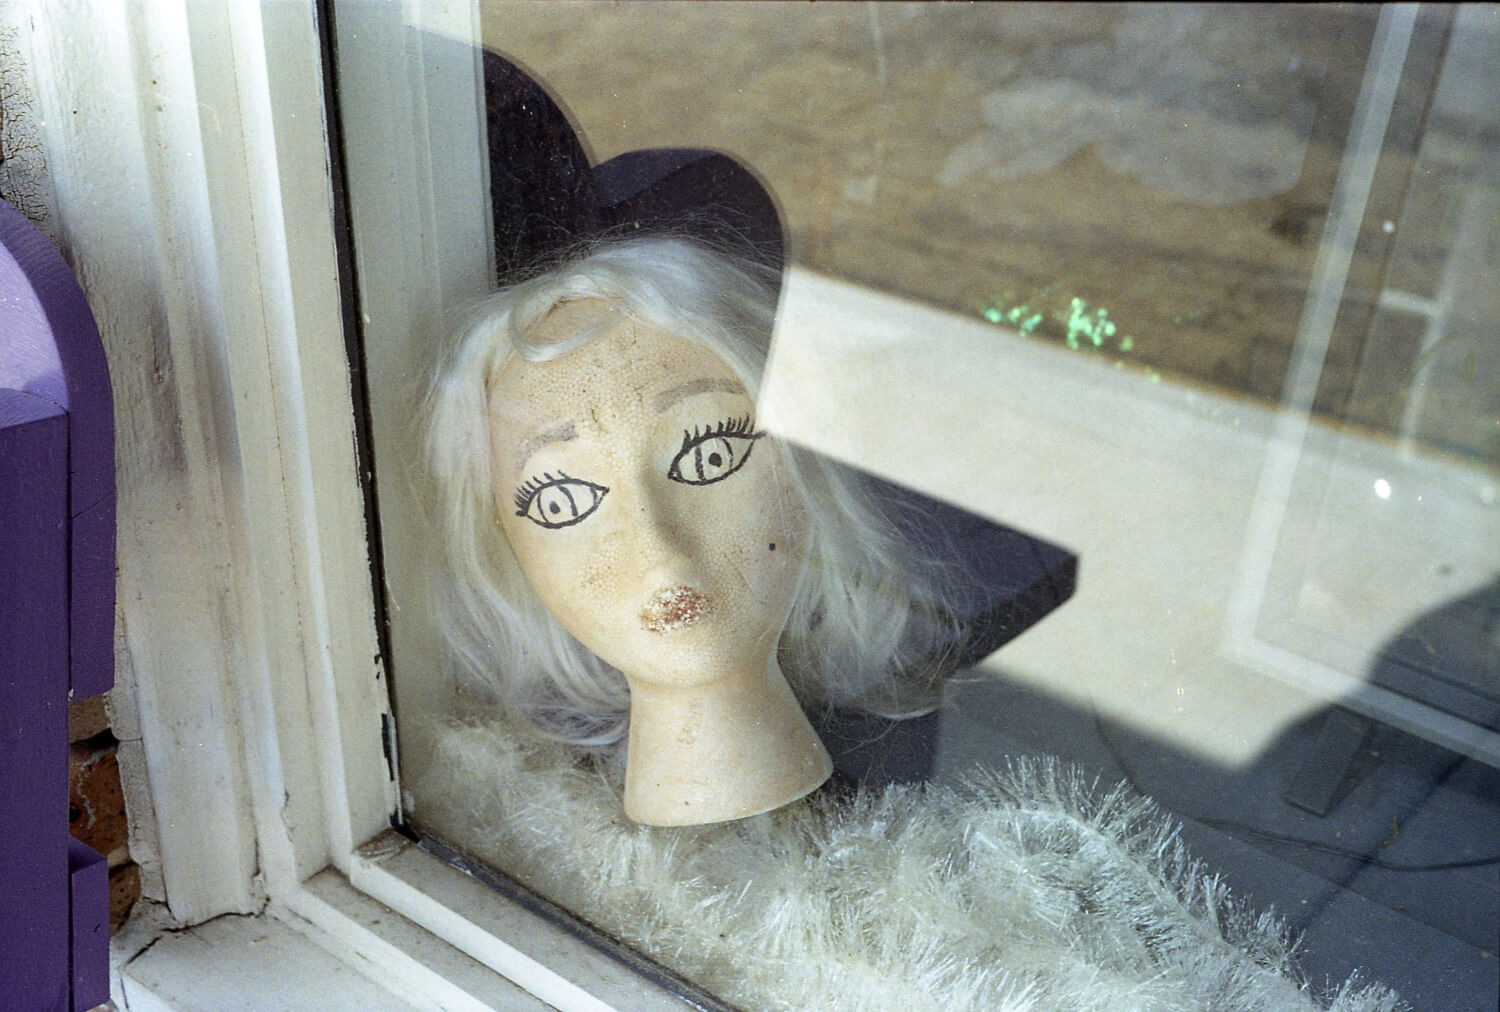 Spotted in a hair salon window in Saltillo, Mississippi.  It made me chuckle, so "SNAP!". - Olympus Ace + Kodak Pro Image 100